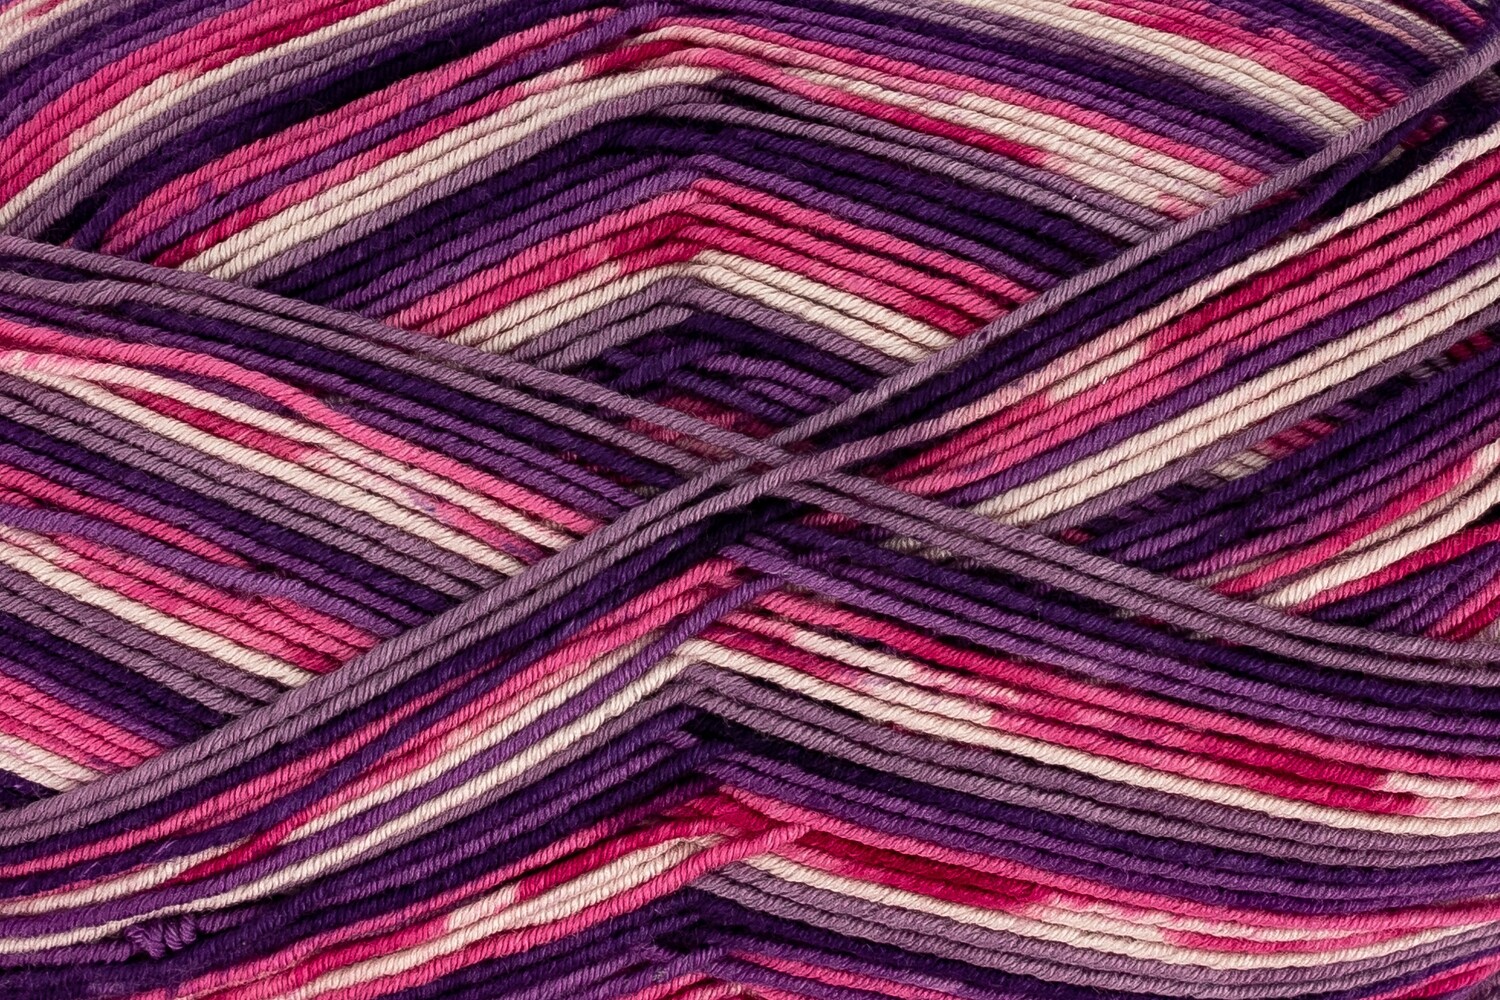 King Cole Footsie 4 ply - Fig 4903